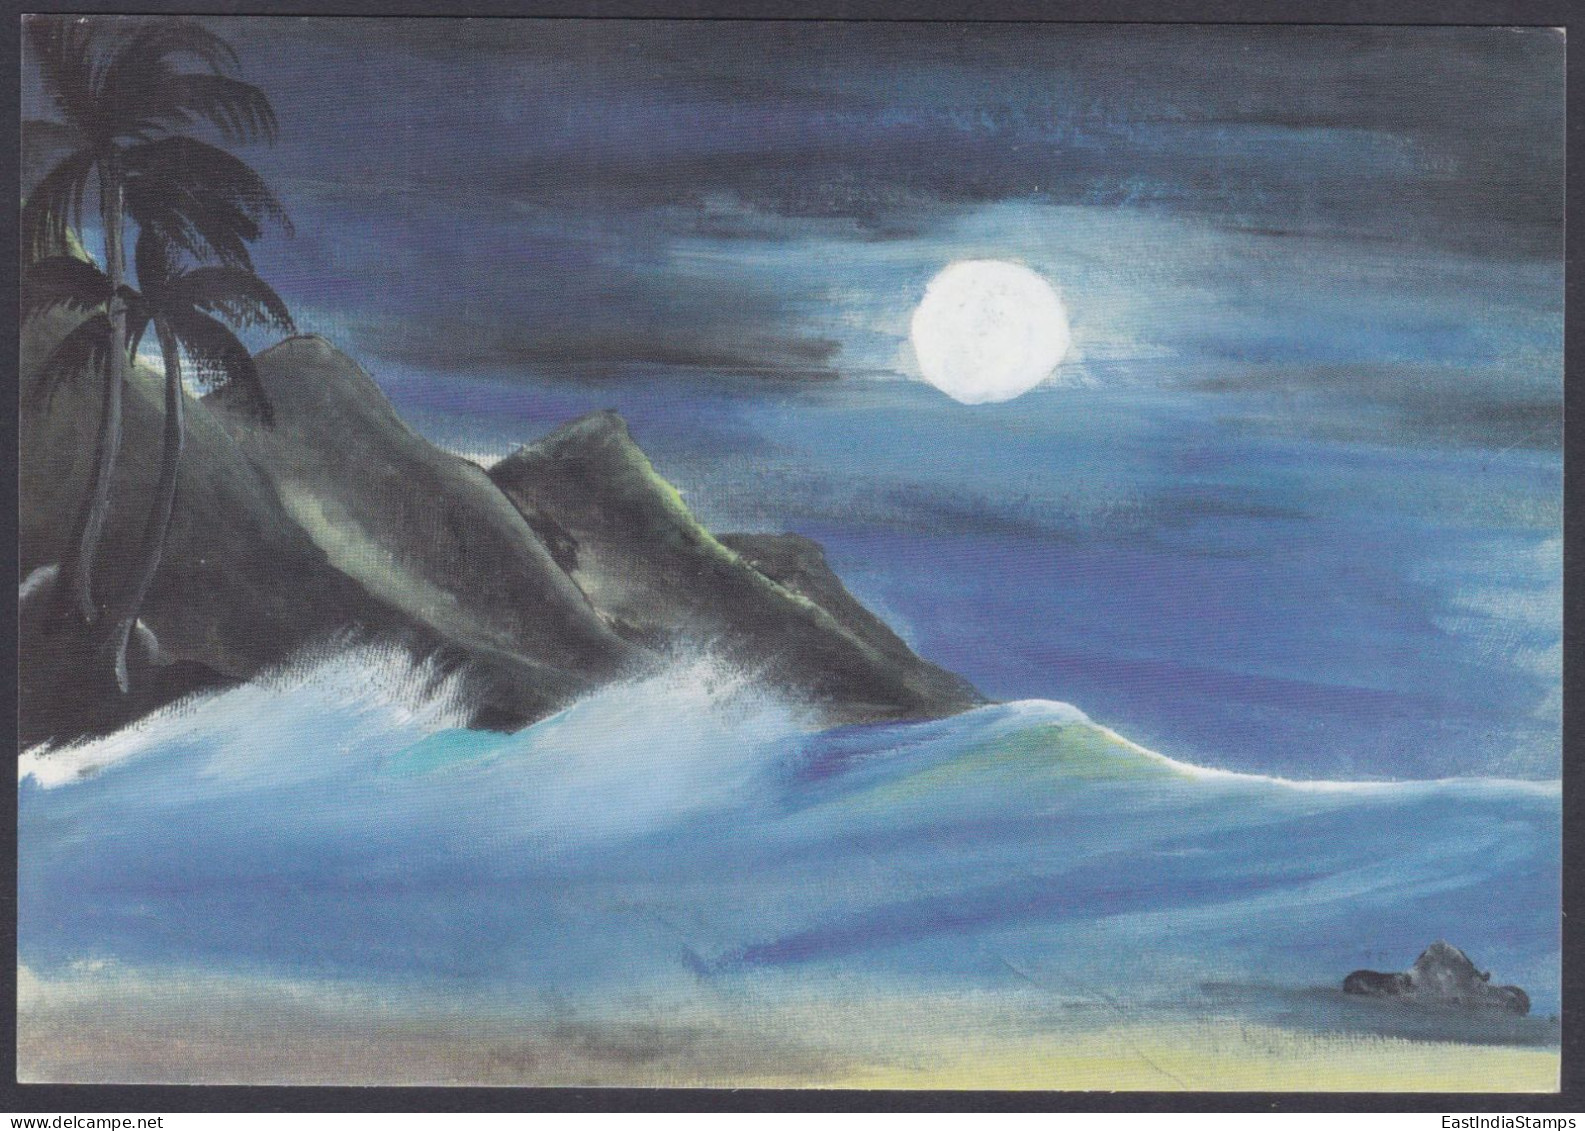 Inde India 2007 Mint Postcard Children's Day, Child, Drawing, Painting, Moon, Night, Trees, Waves, Sea, Mountain - Inde